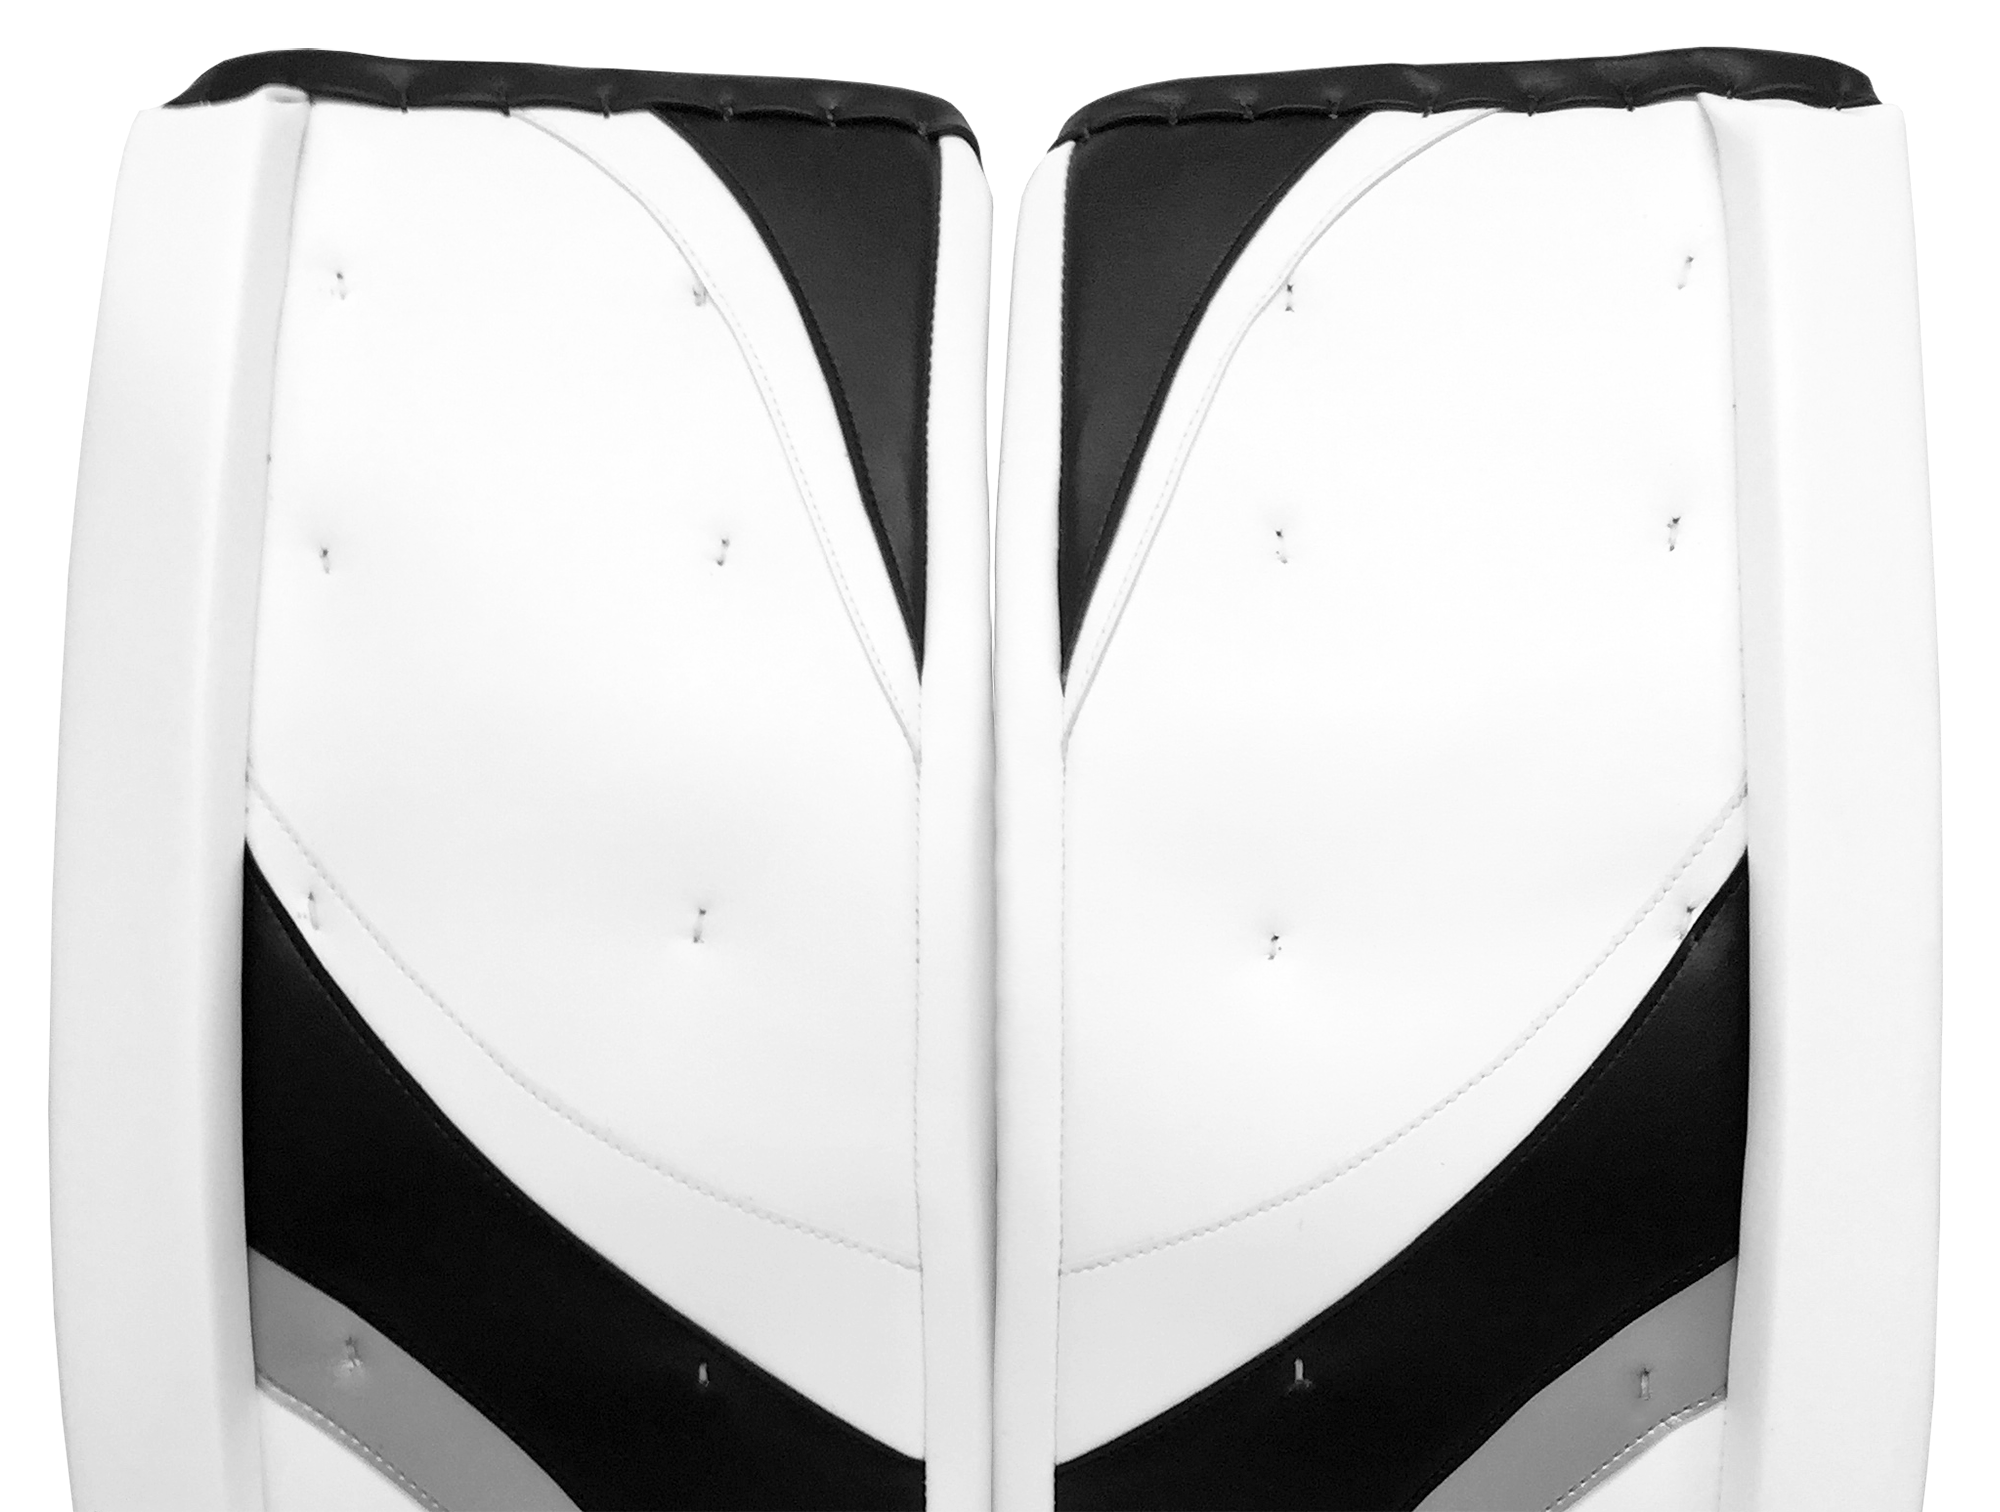 Close up of top portion of pads from front